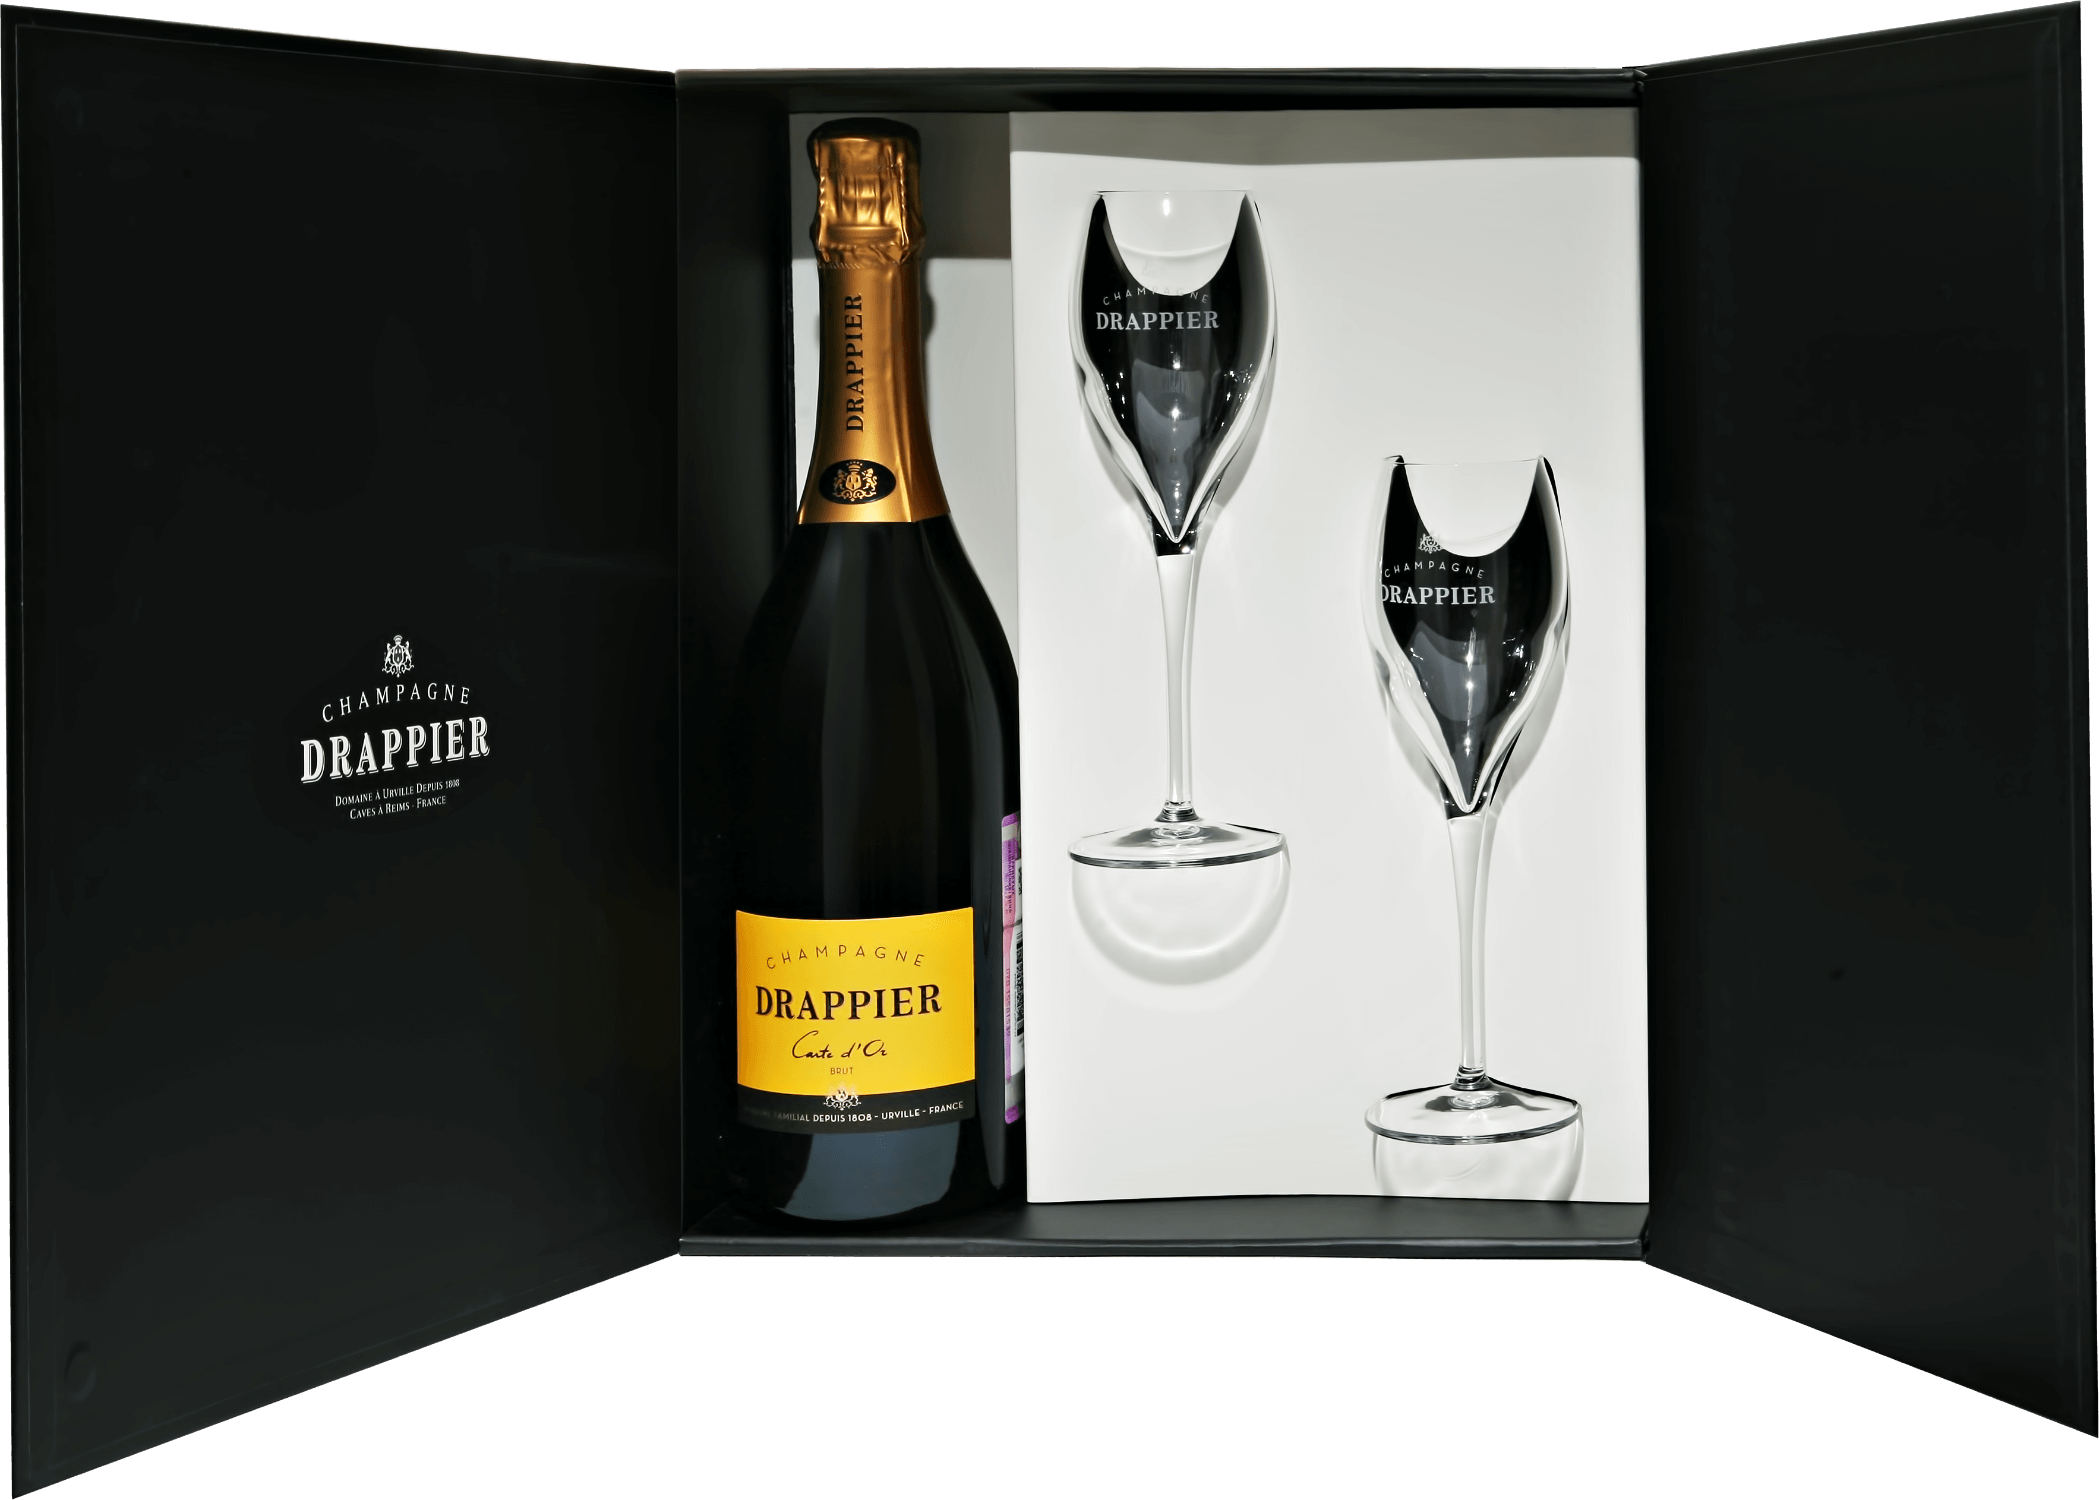 Drappier Carte d’Or Brut Champagne AOP in gift box with two glasses drappier carte d’or brut champagne aop